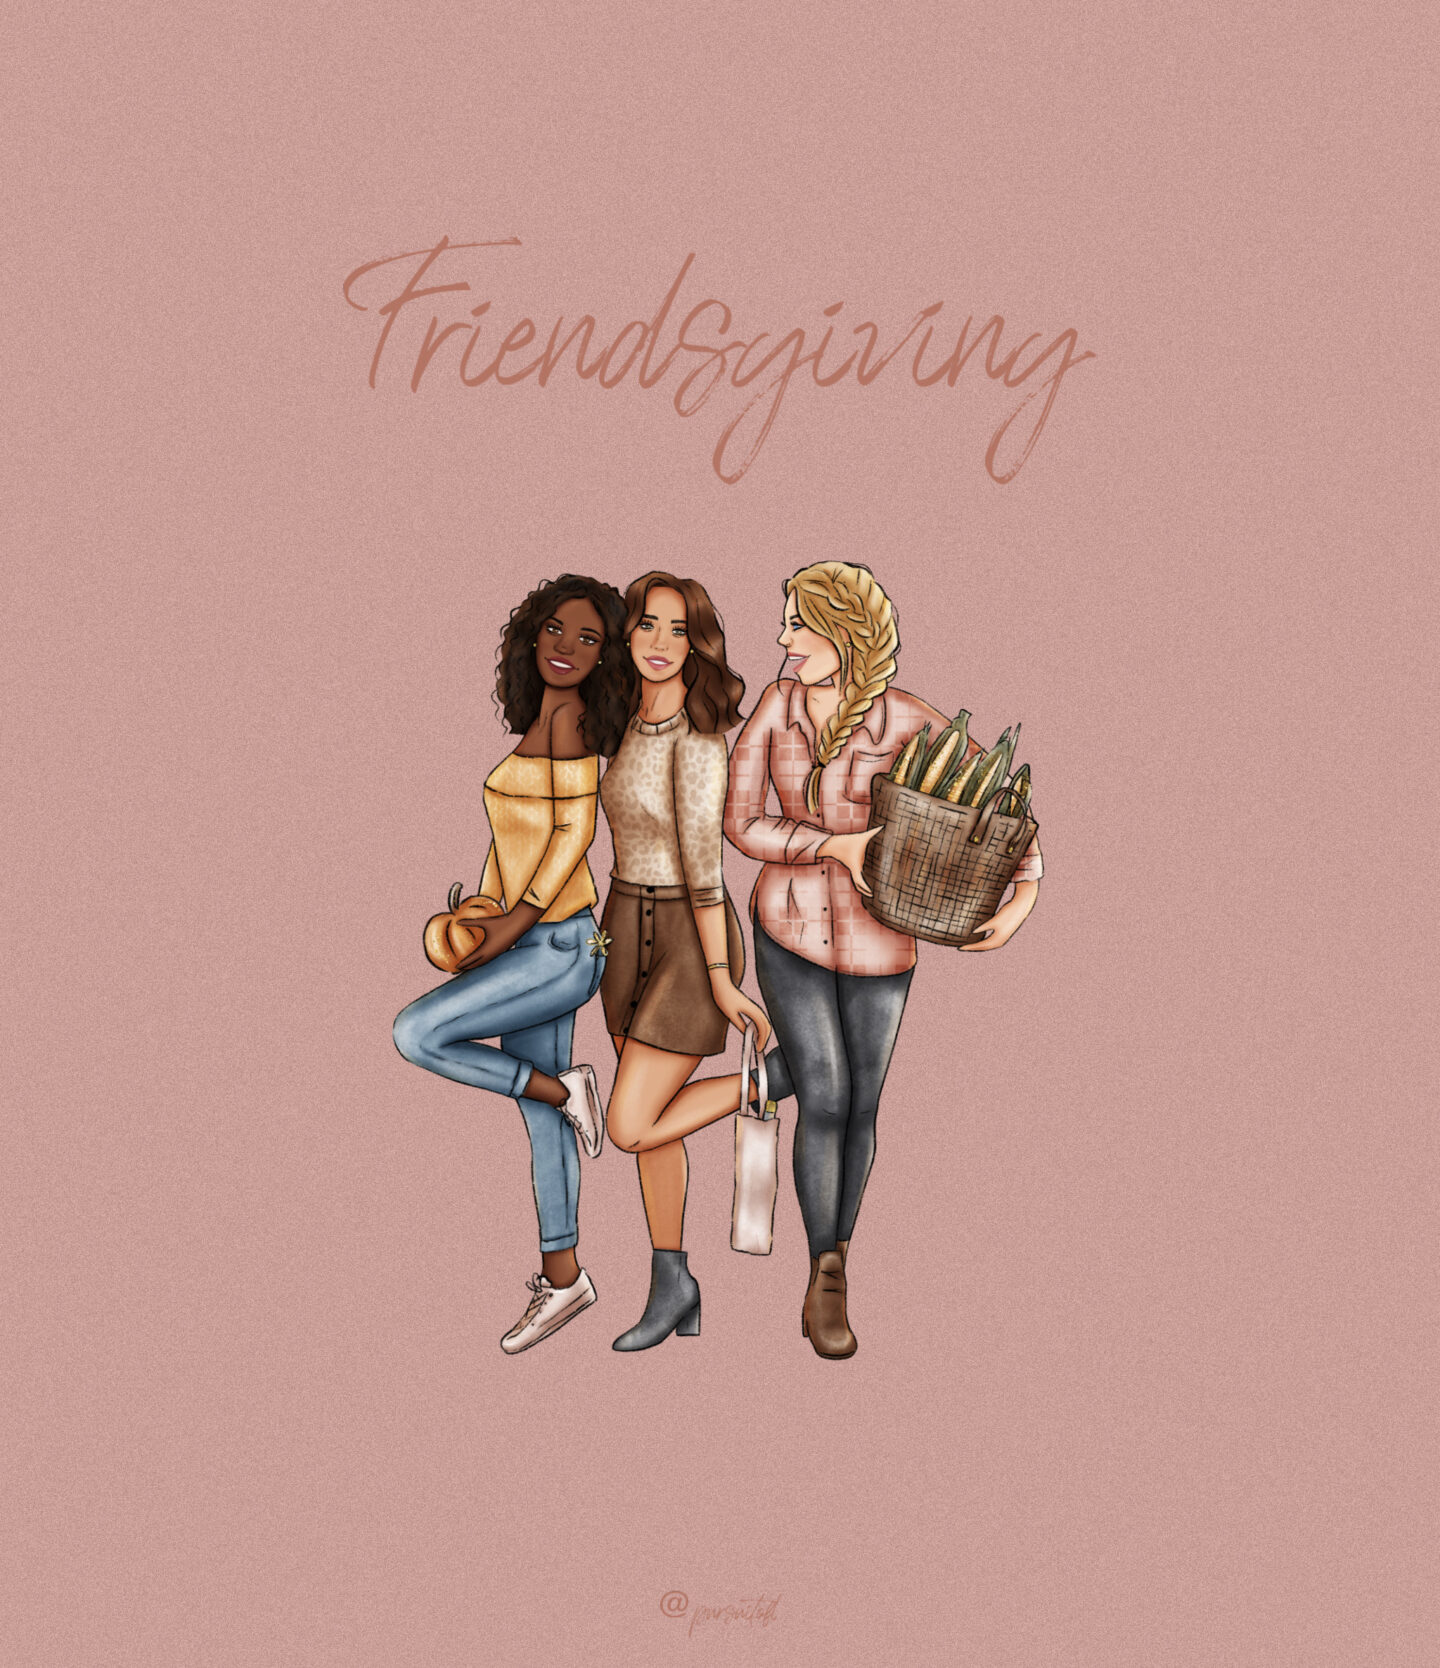 Brown Tablet Wallpaper with 3 Friends Wearing Fall Outfits, Holding Corn, a Pumpkin, and Wine, with Friendsgiving Text